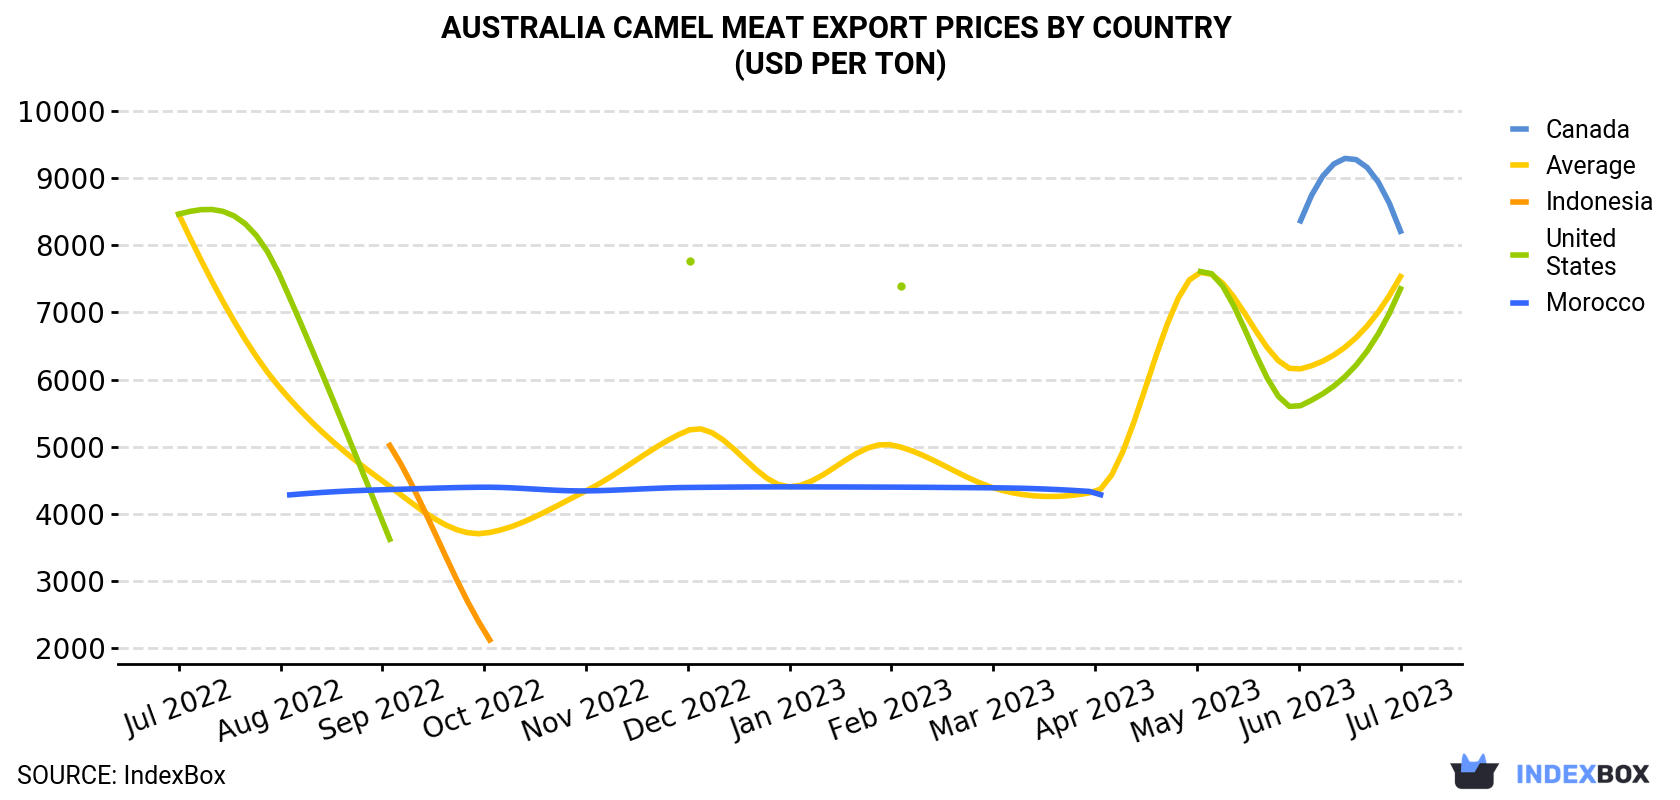 Australia Camel Meat Export Prices By Country (USD Per Ton)